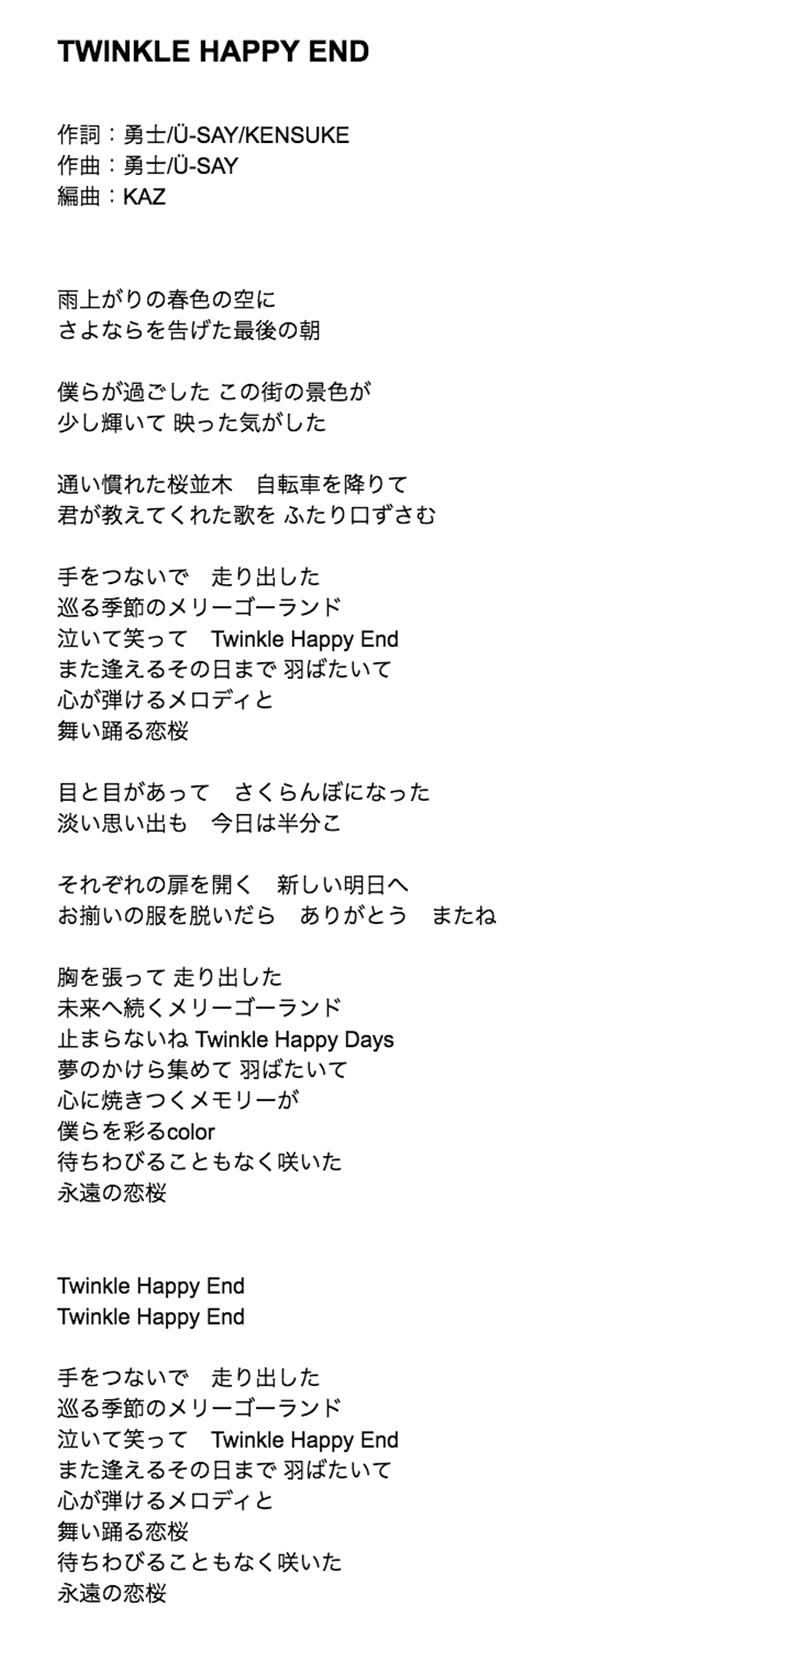 Swing4songs 配信シングル インタビュー 歌詞公開中 Buzz Official Site Official Site